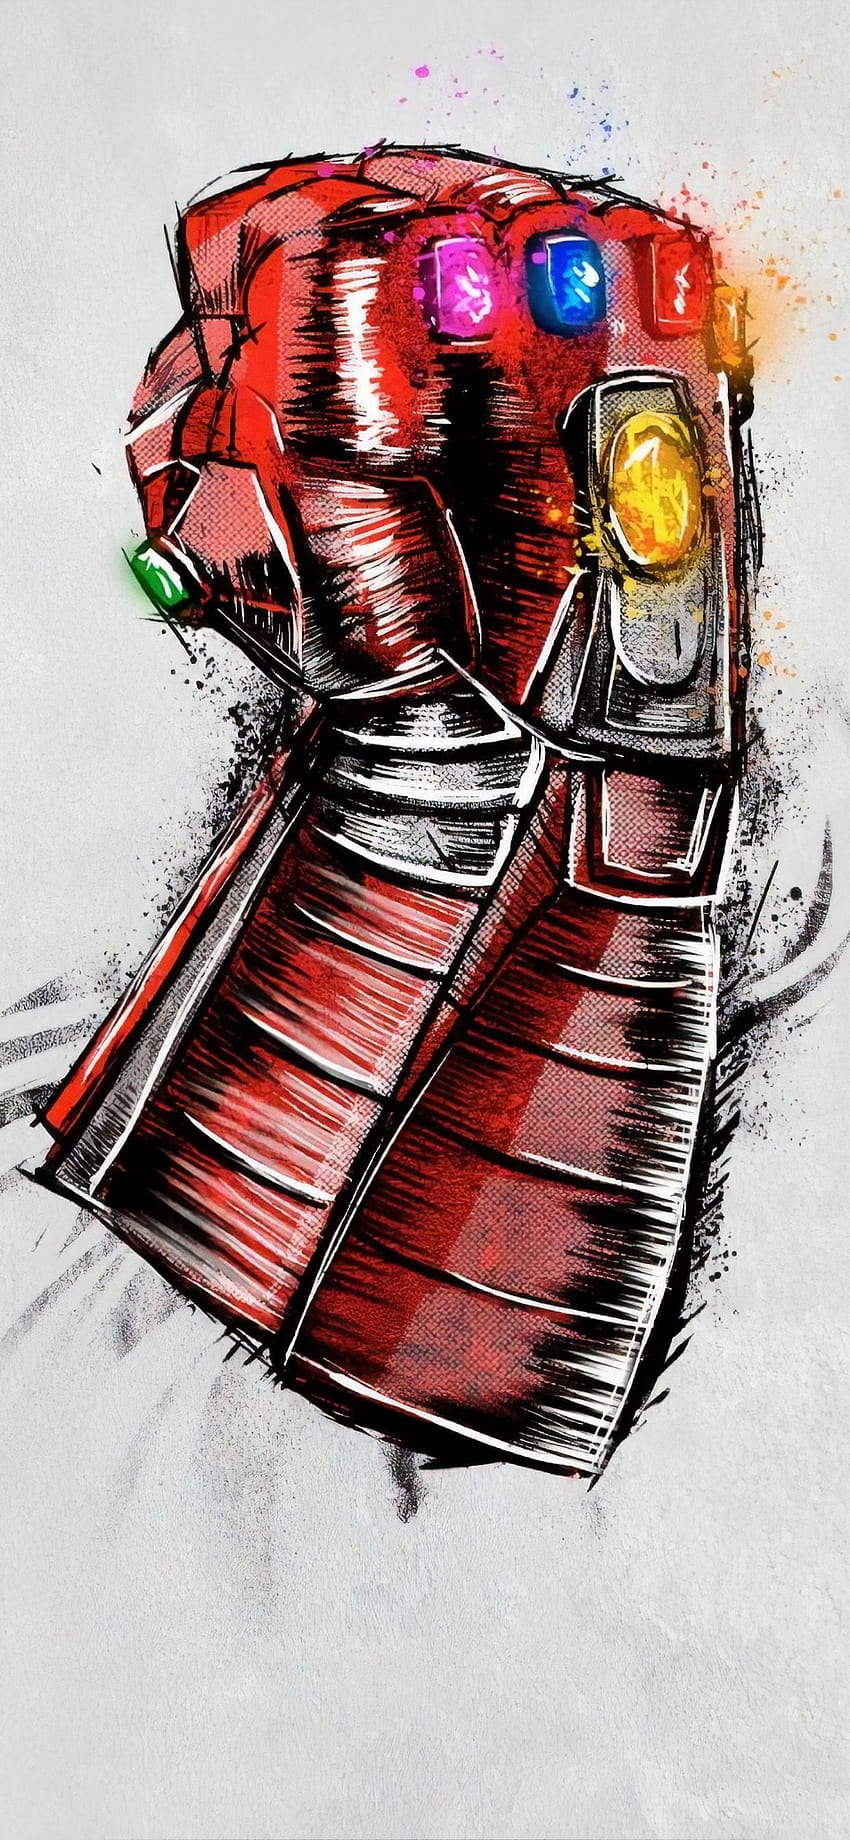 Drawing of Thanos with Infinity Gauntlet by Jaycarts on DeviantArt